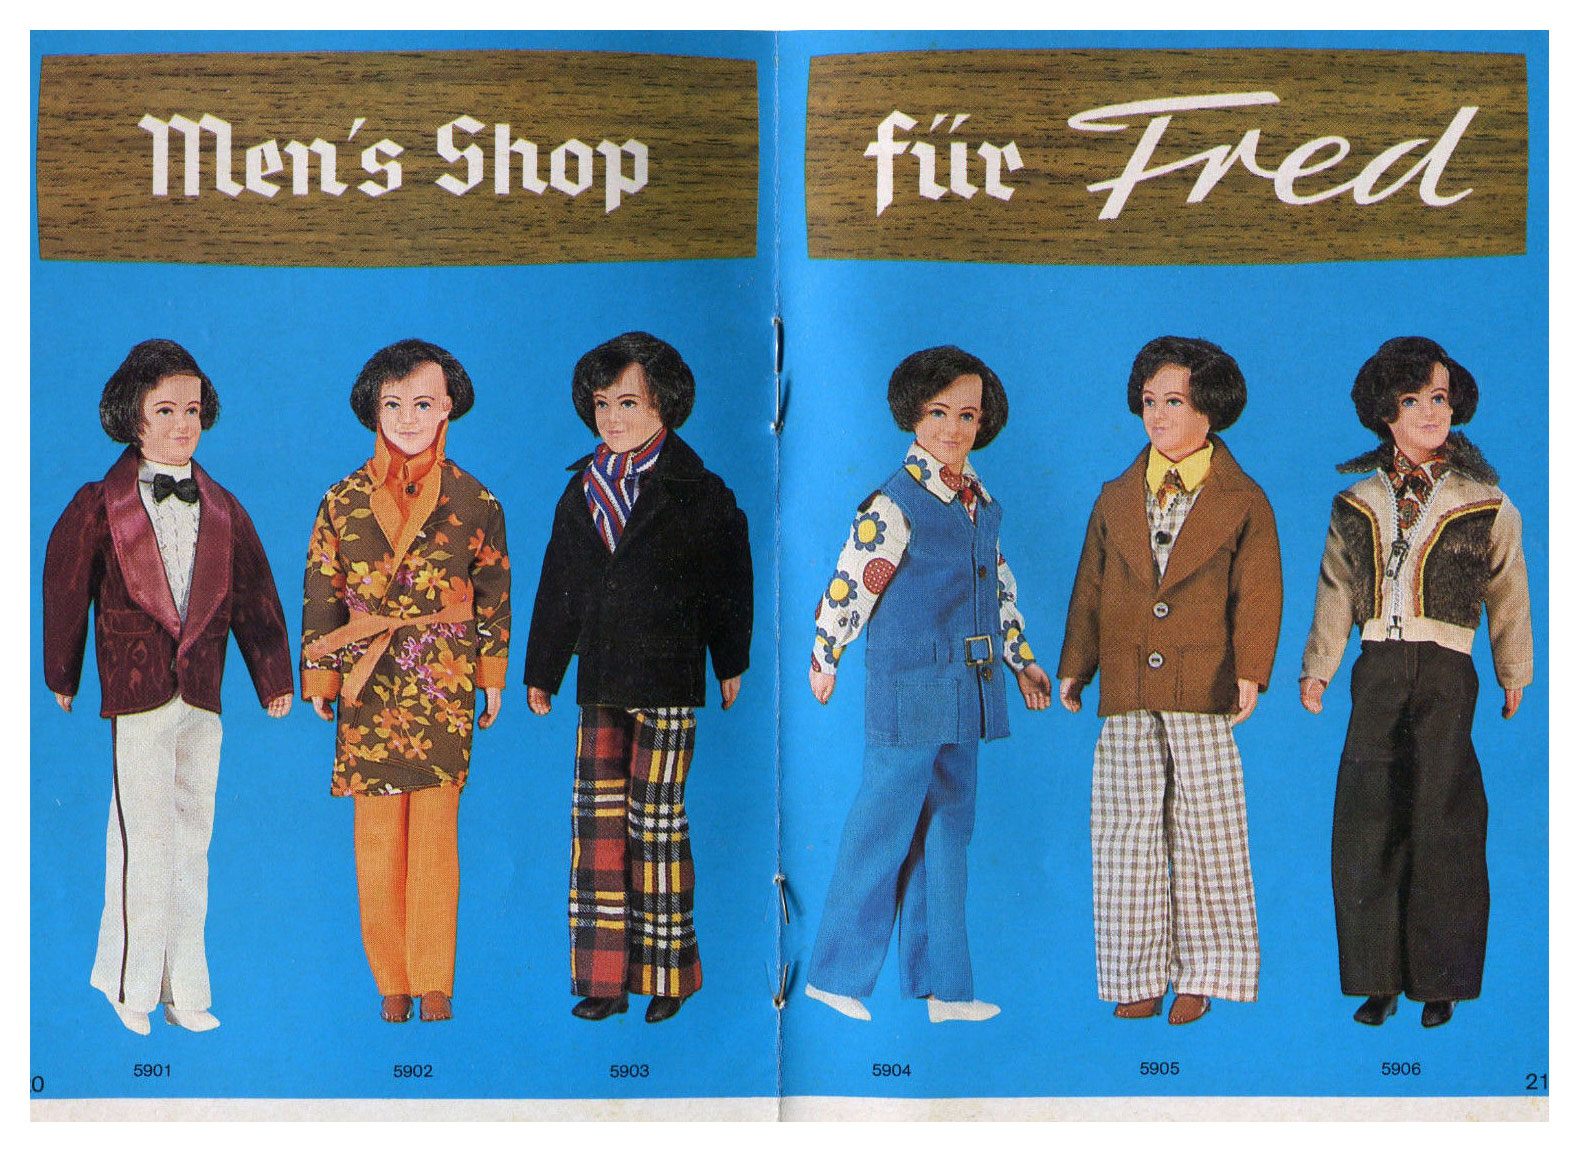 From 1975 Plasty Petra & Fred Mode catalogue